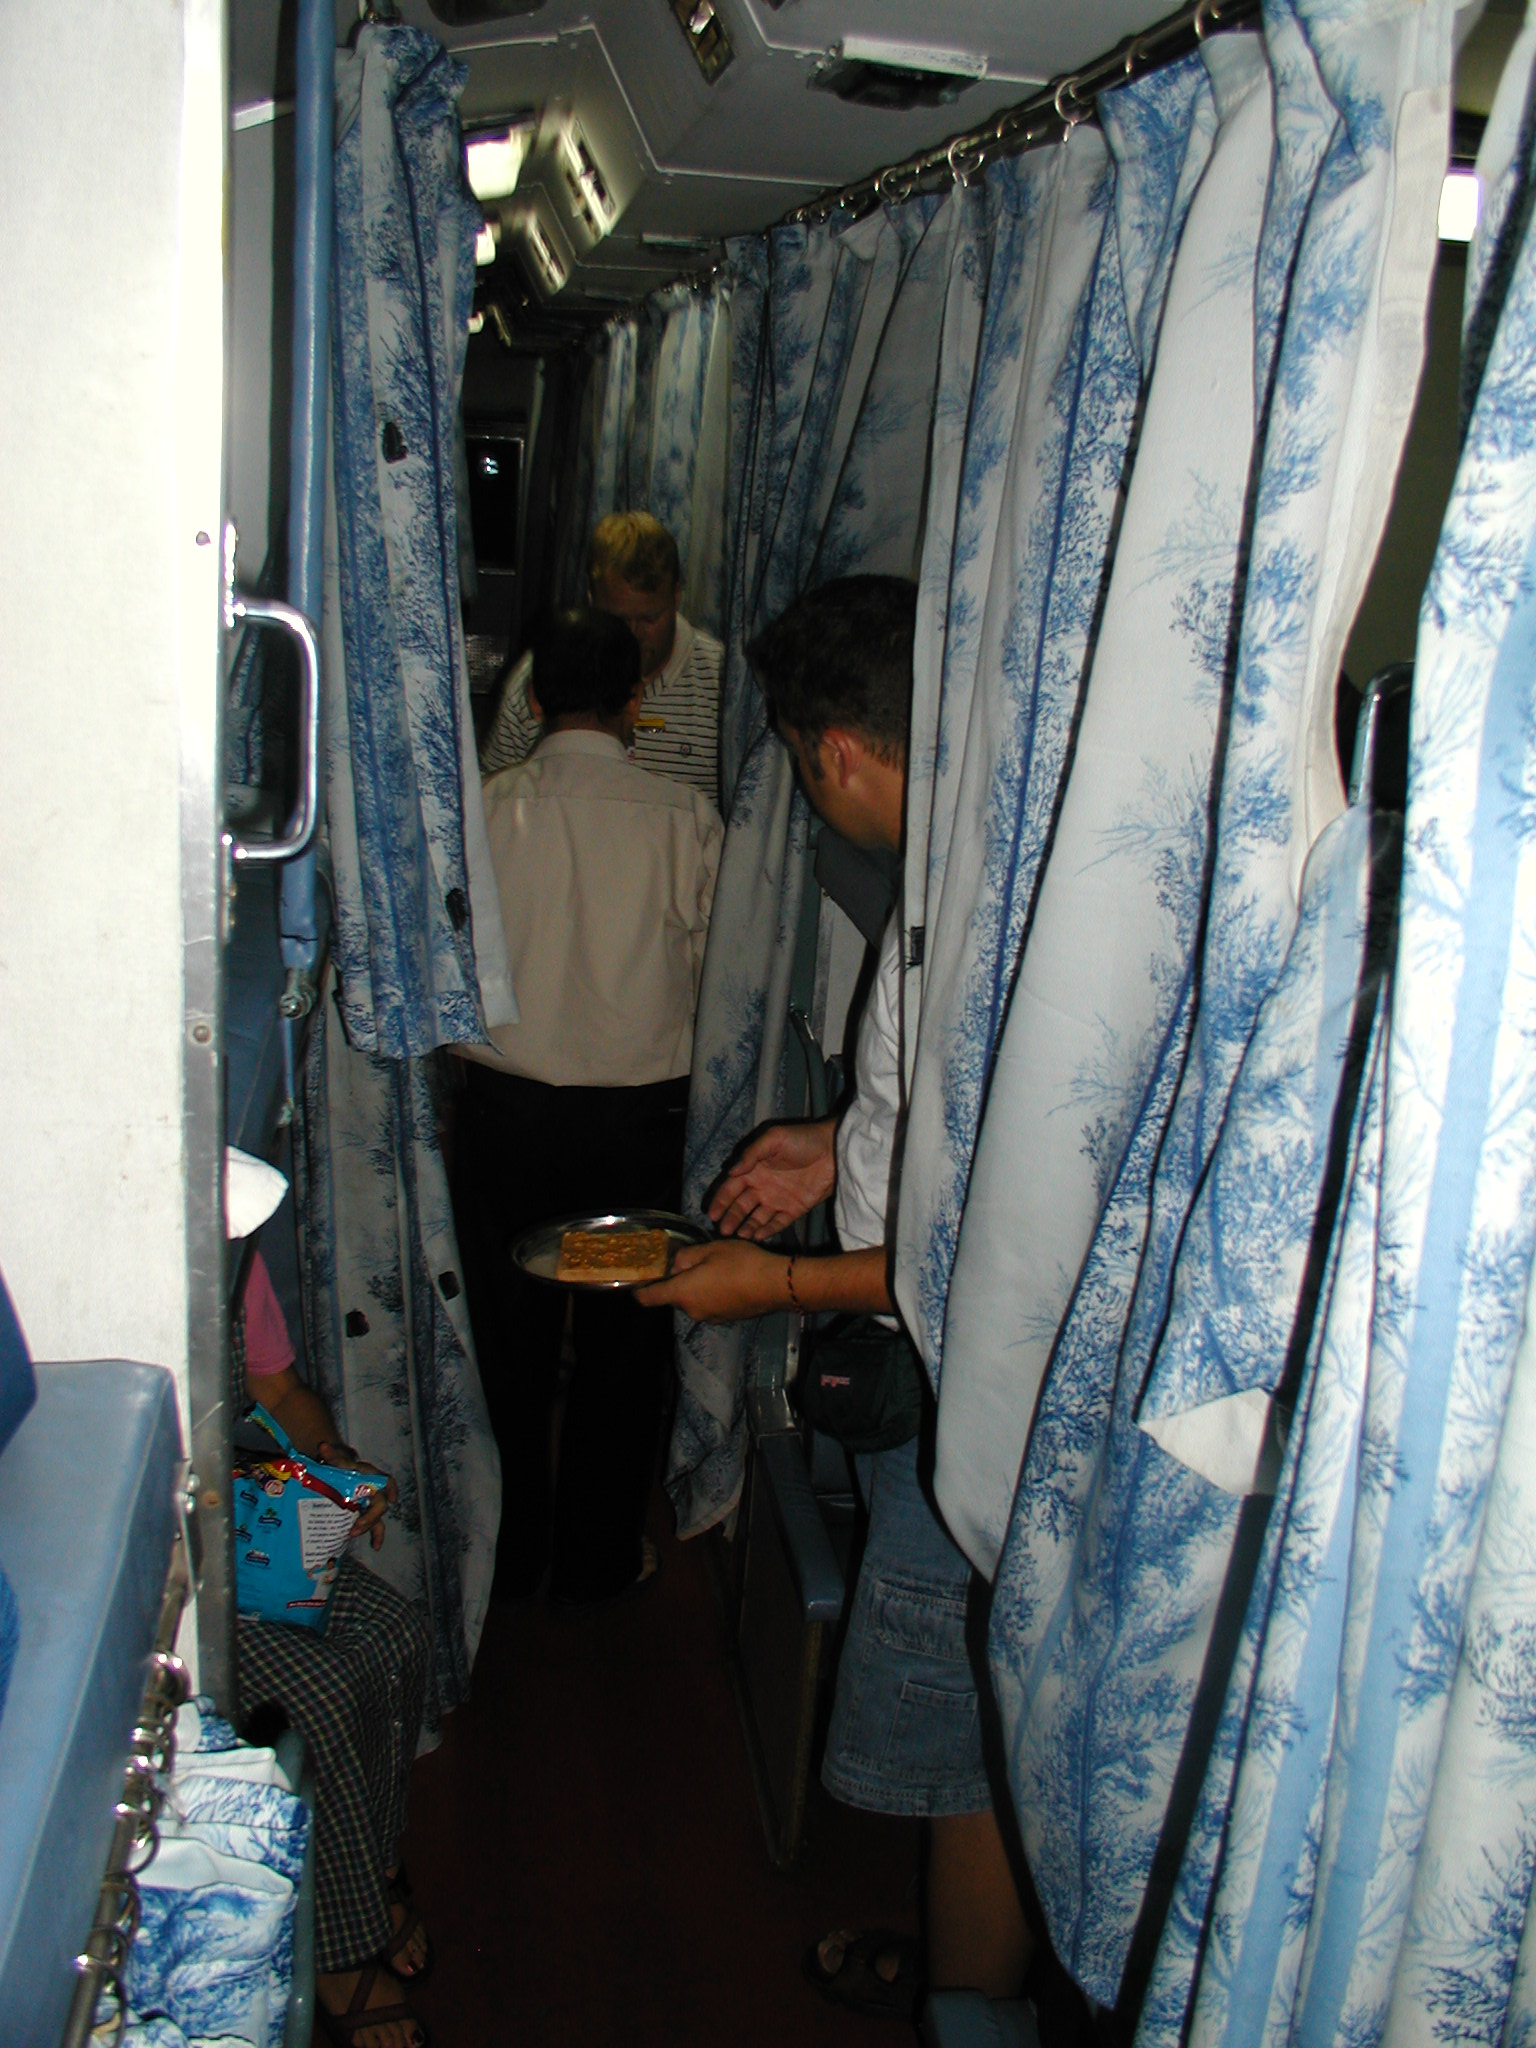 The inside of an Indian train car 